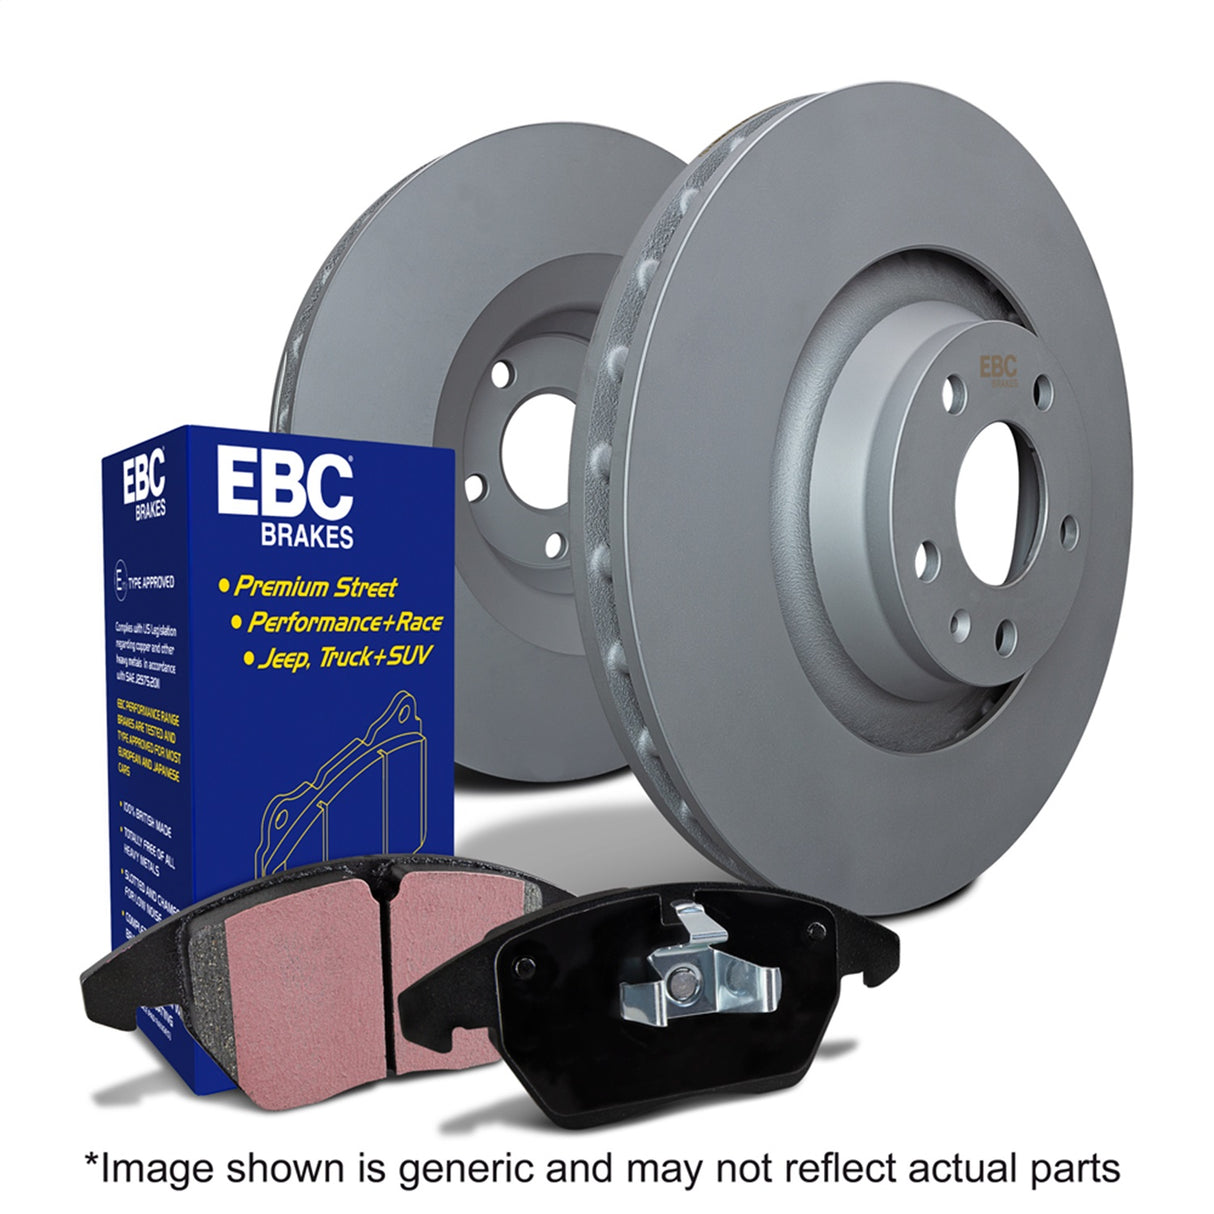 EBC Brakes S20K1291 S20 Kits Ultimax and Plain Rotors - Roam Overland Outfitters